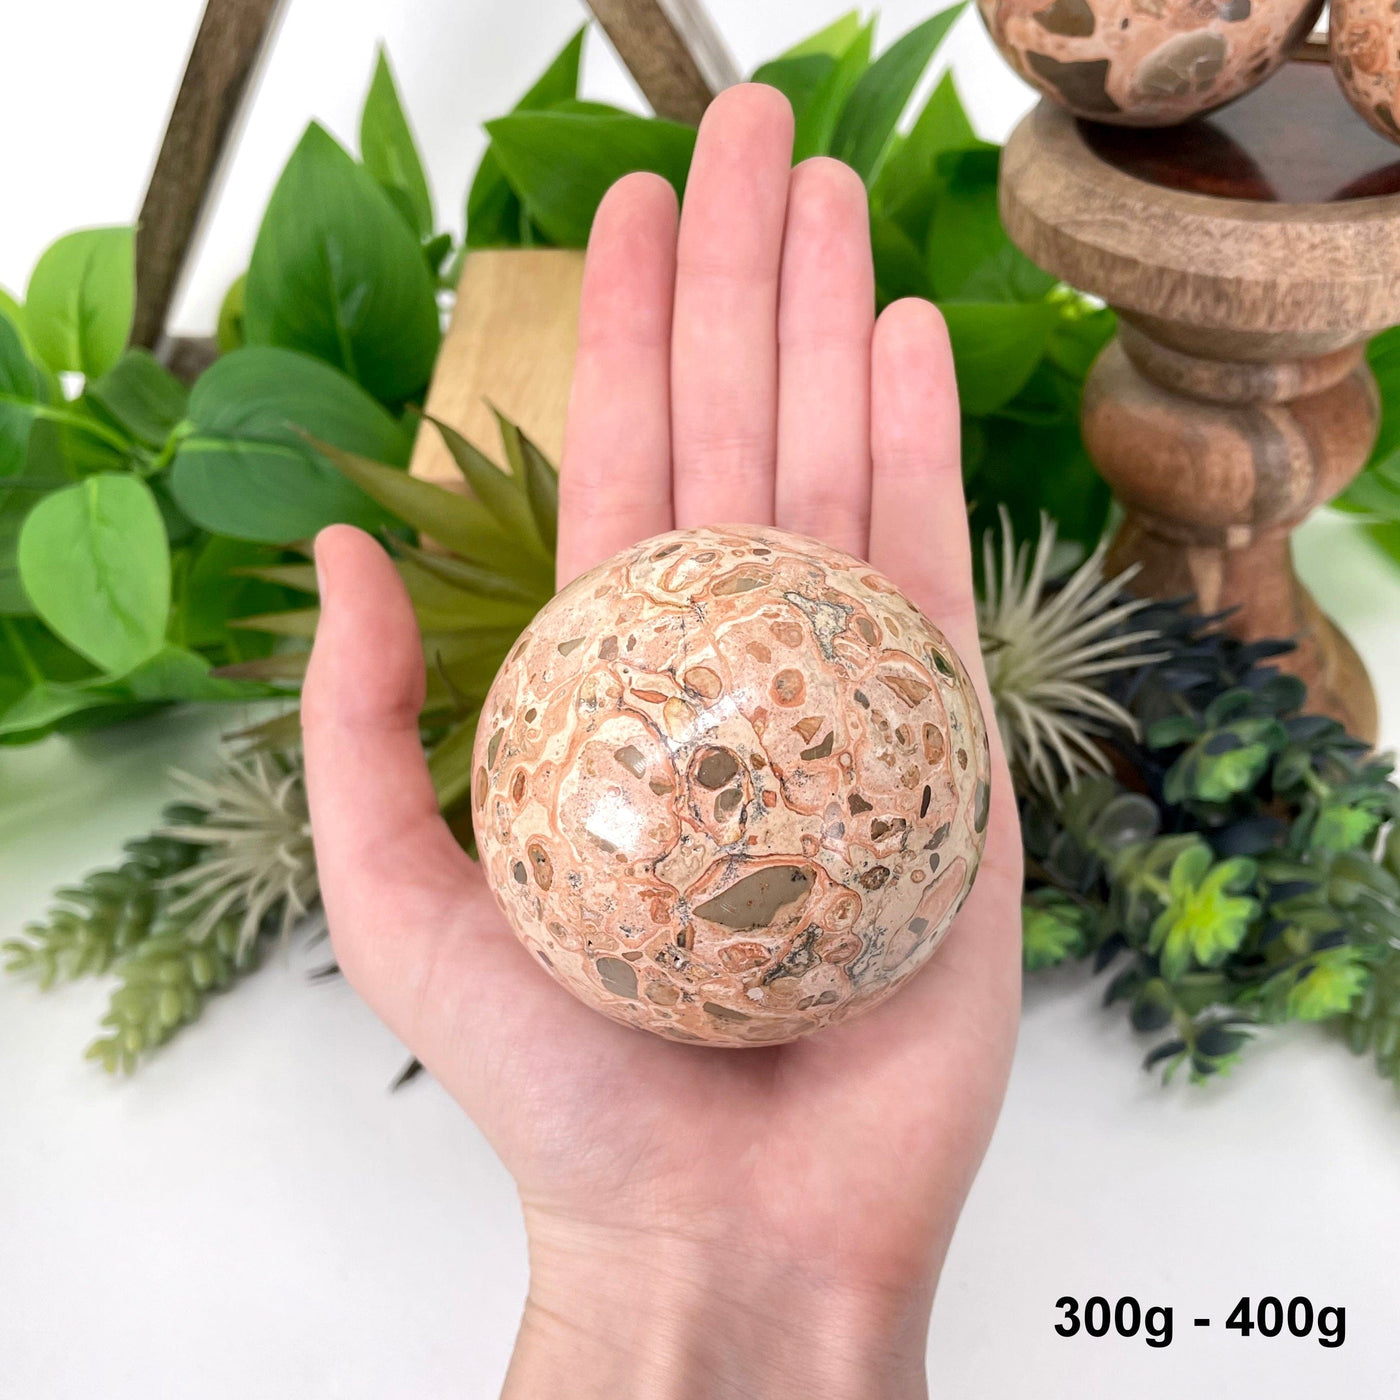 one 300g - 400g leopard skin rhyolite sphere in hand in front of backdrop for size reference